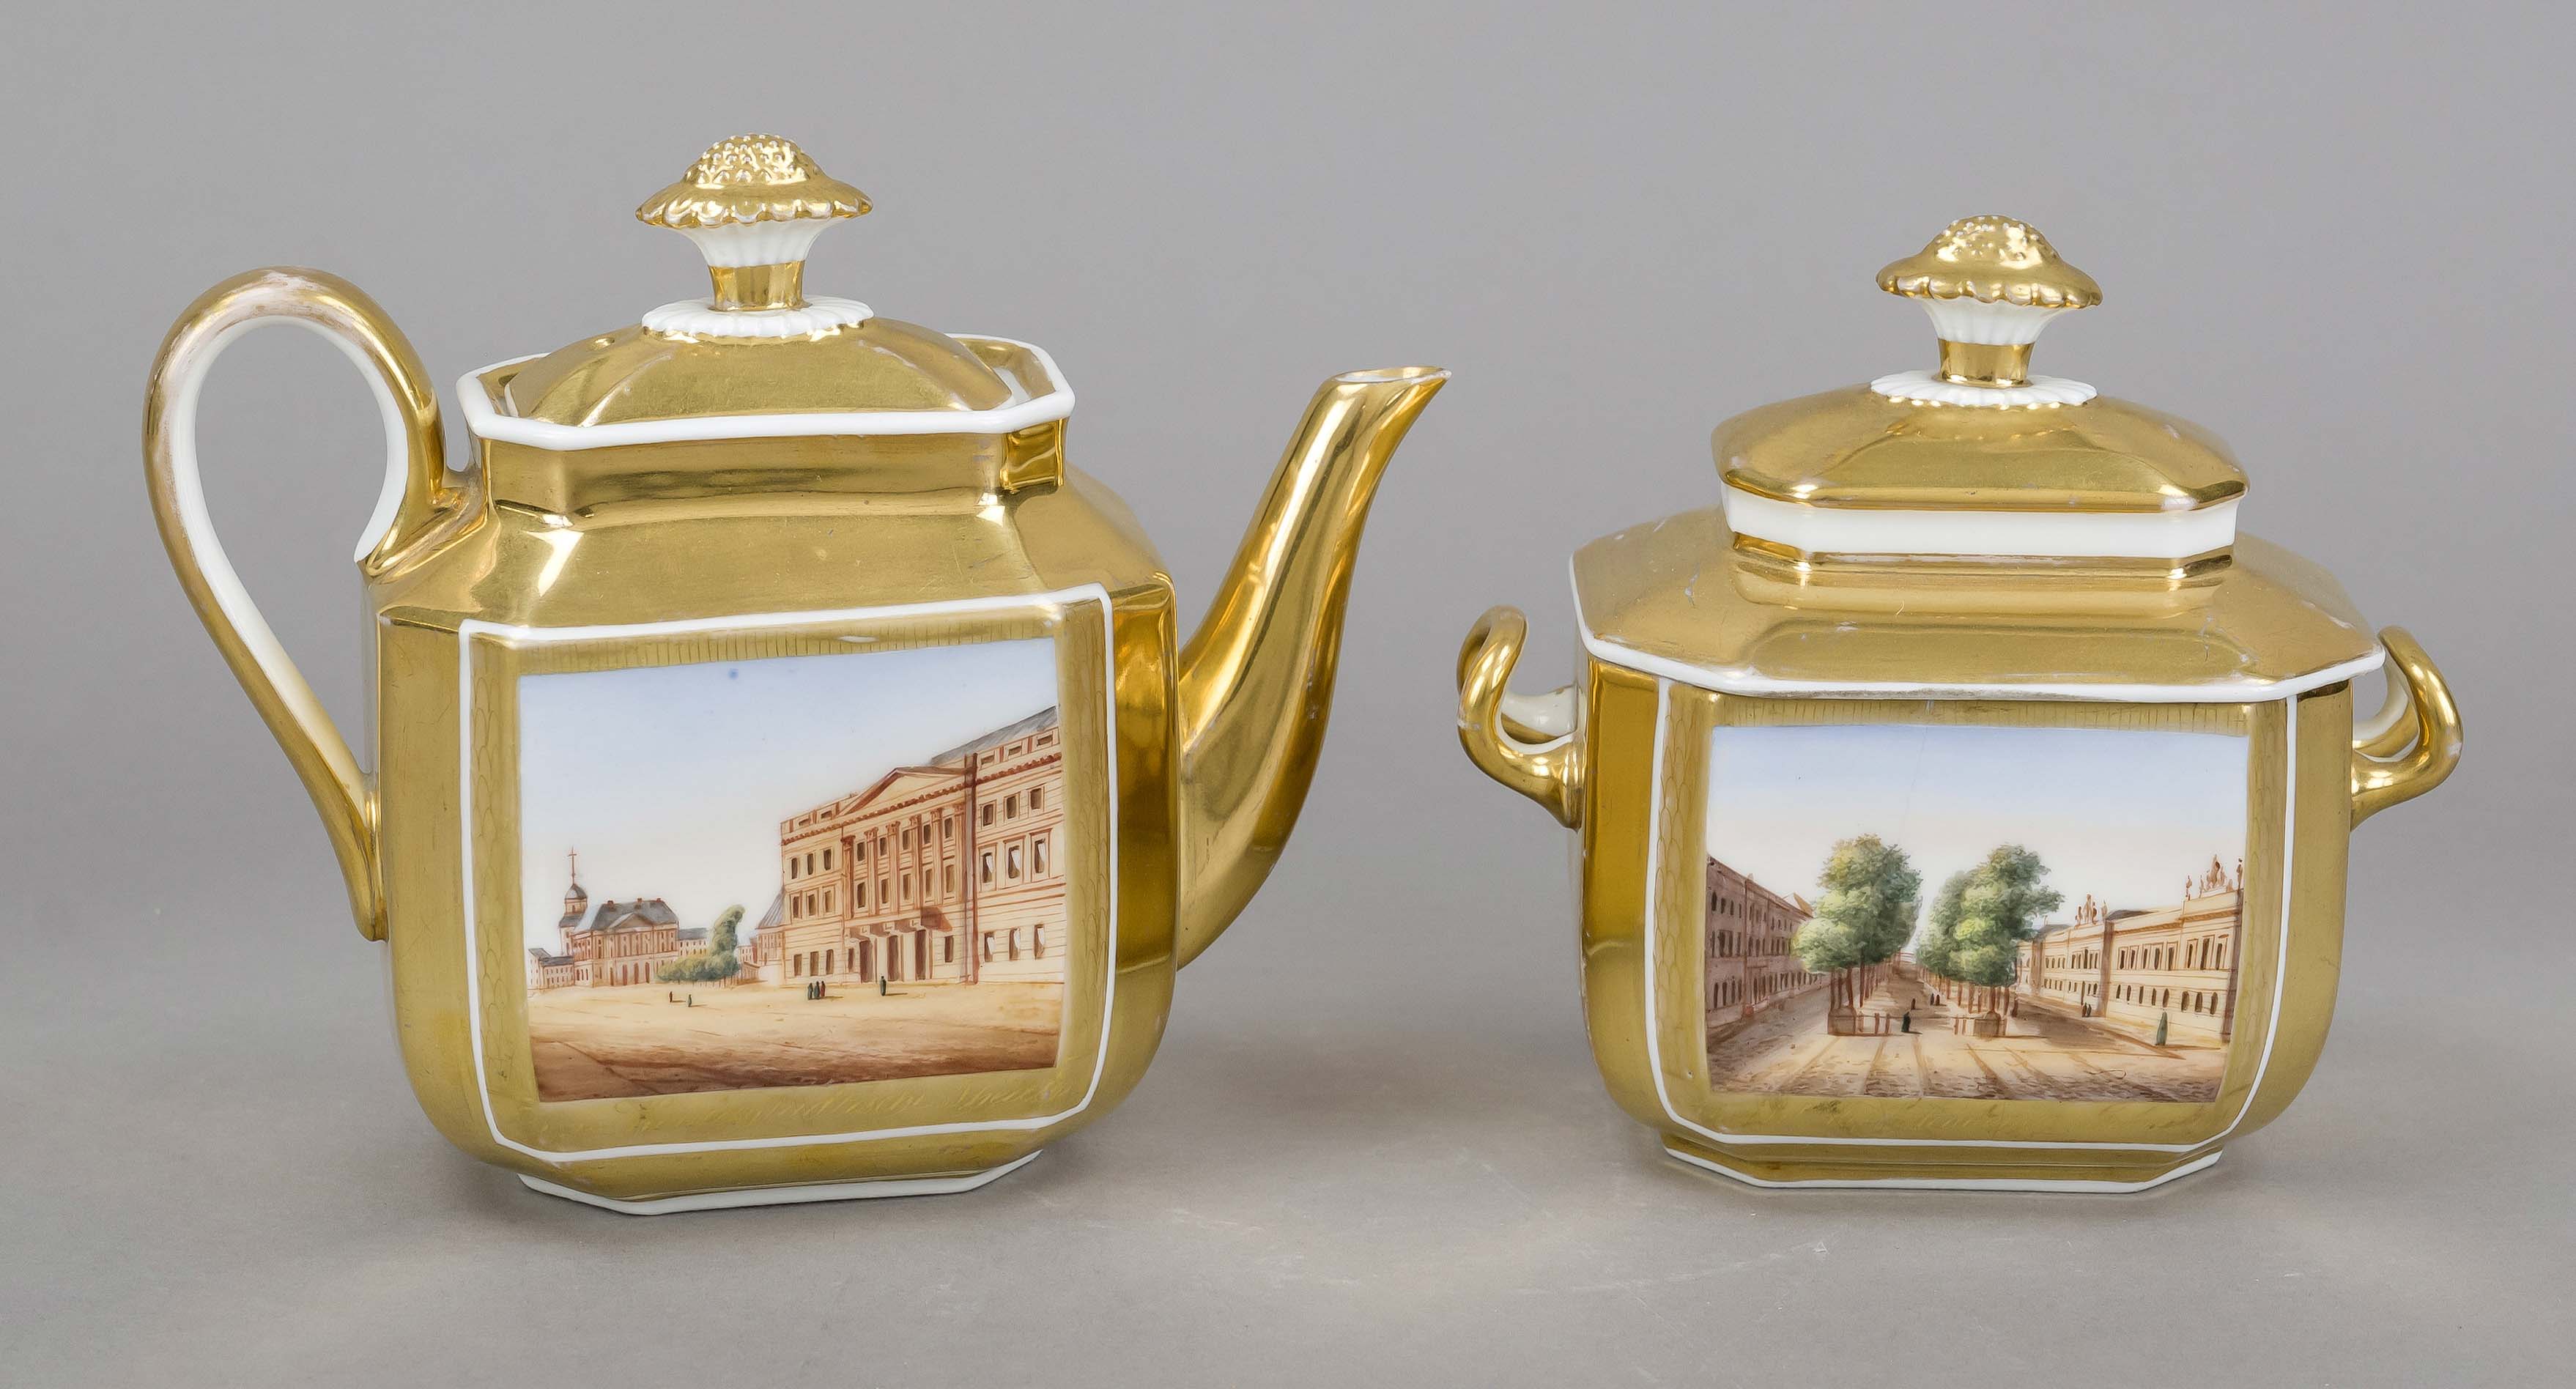 Jug, sugar bowl and view cup with saucer, early 19th century, w. France, polychrome painting in - Image 2 of 2